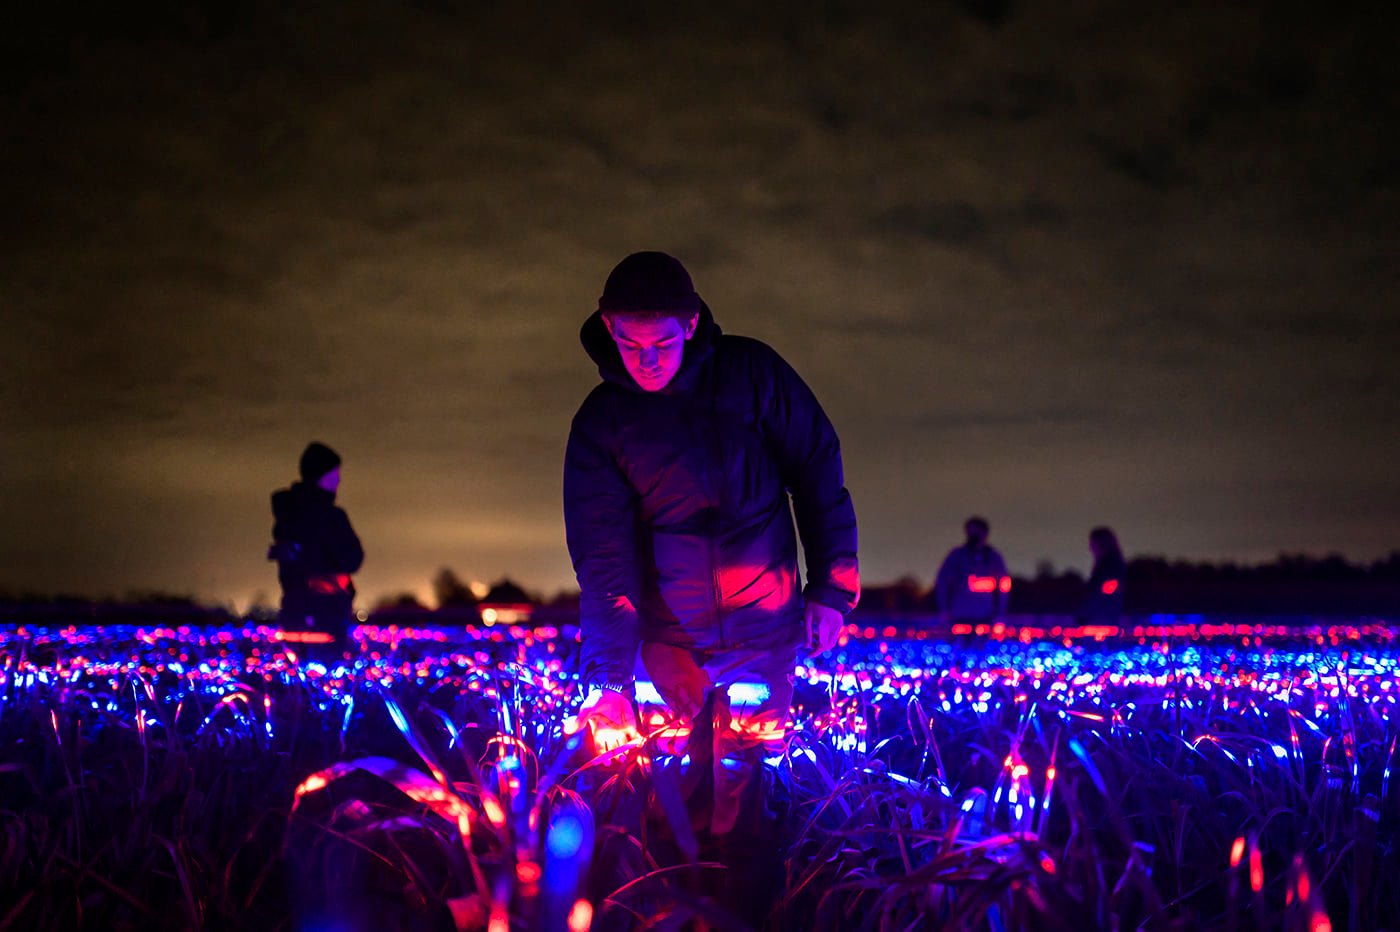 You experience the artwork as ‘dancing lights’ across the huge agricultural field.